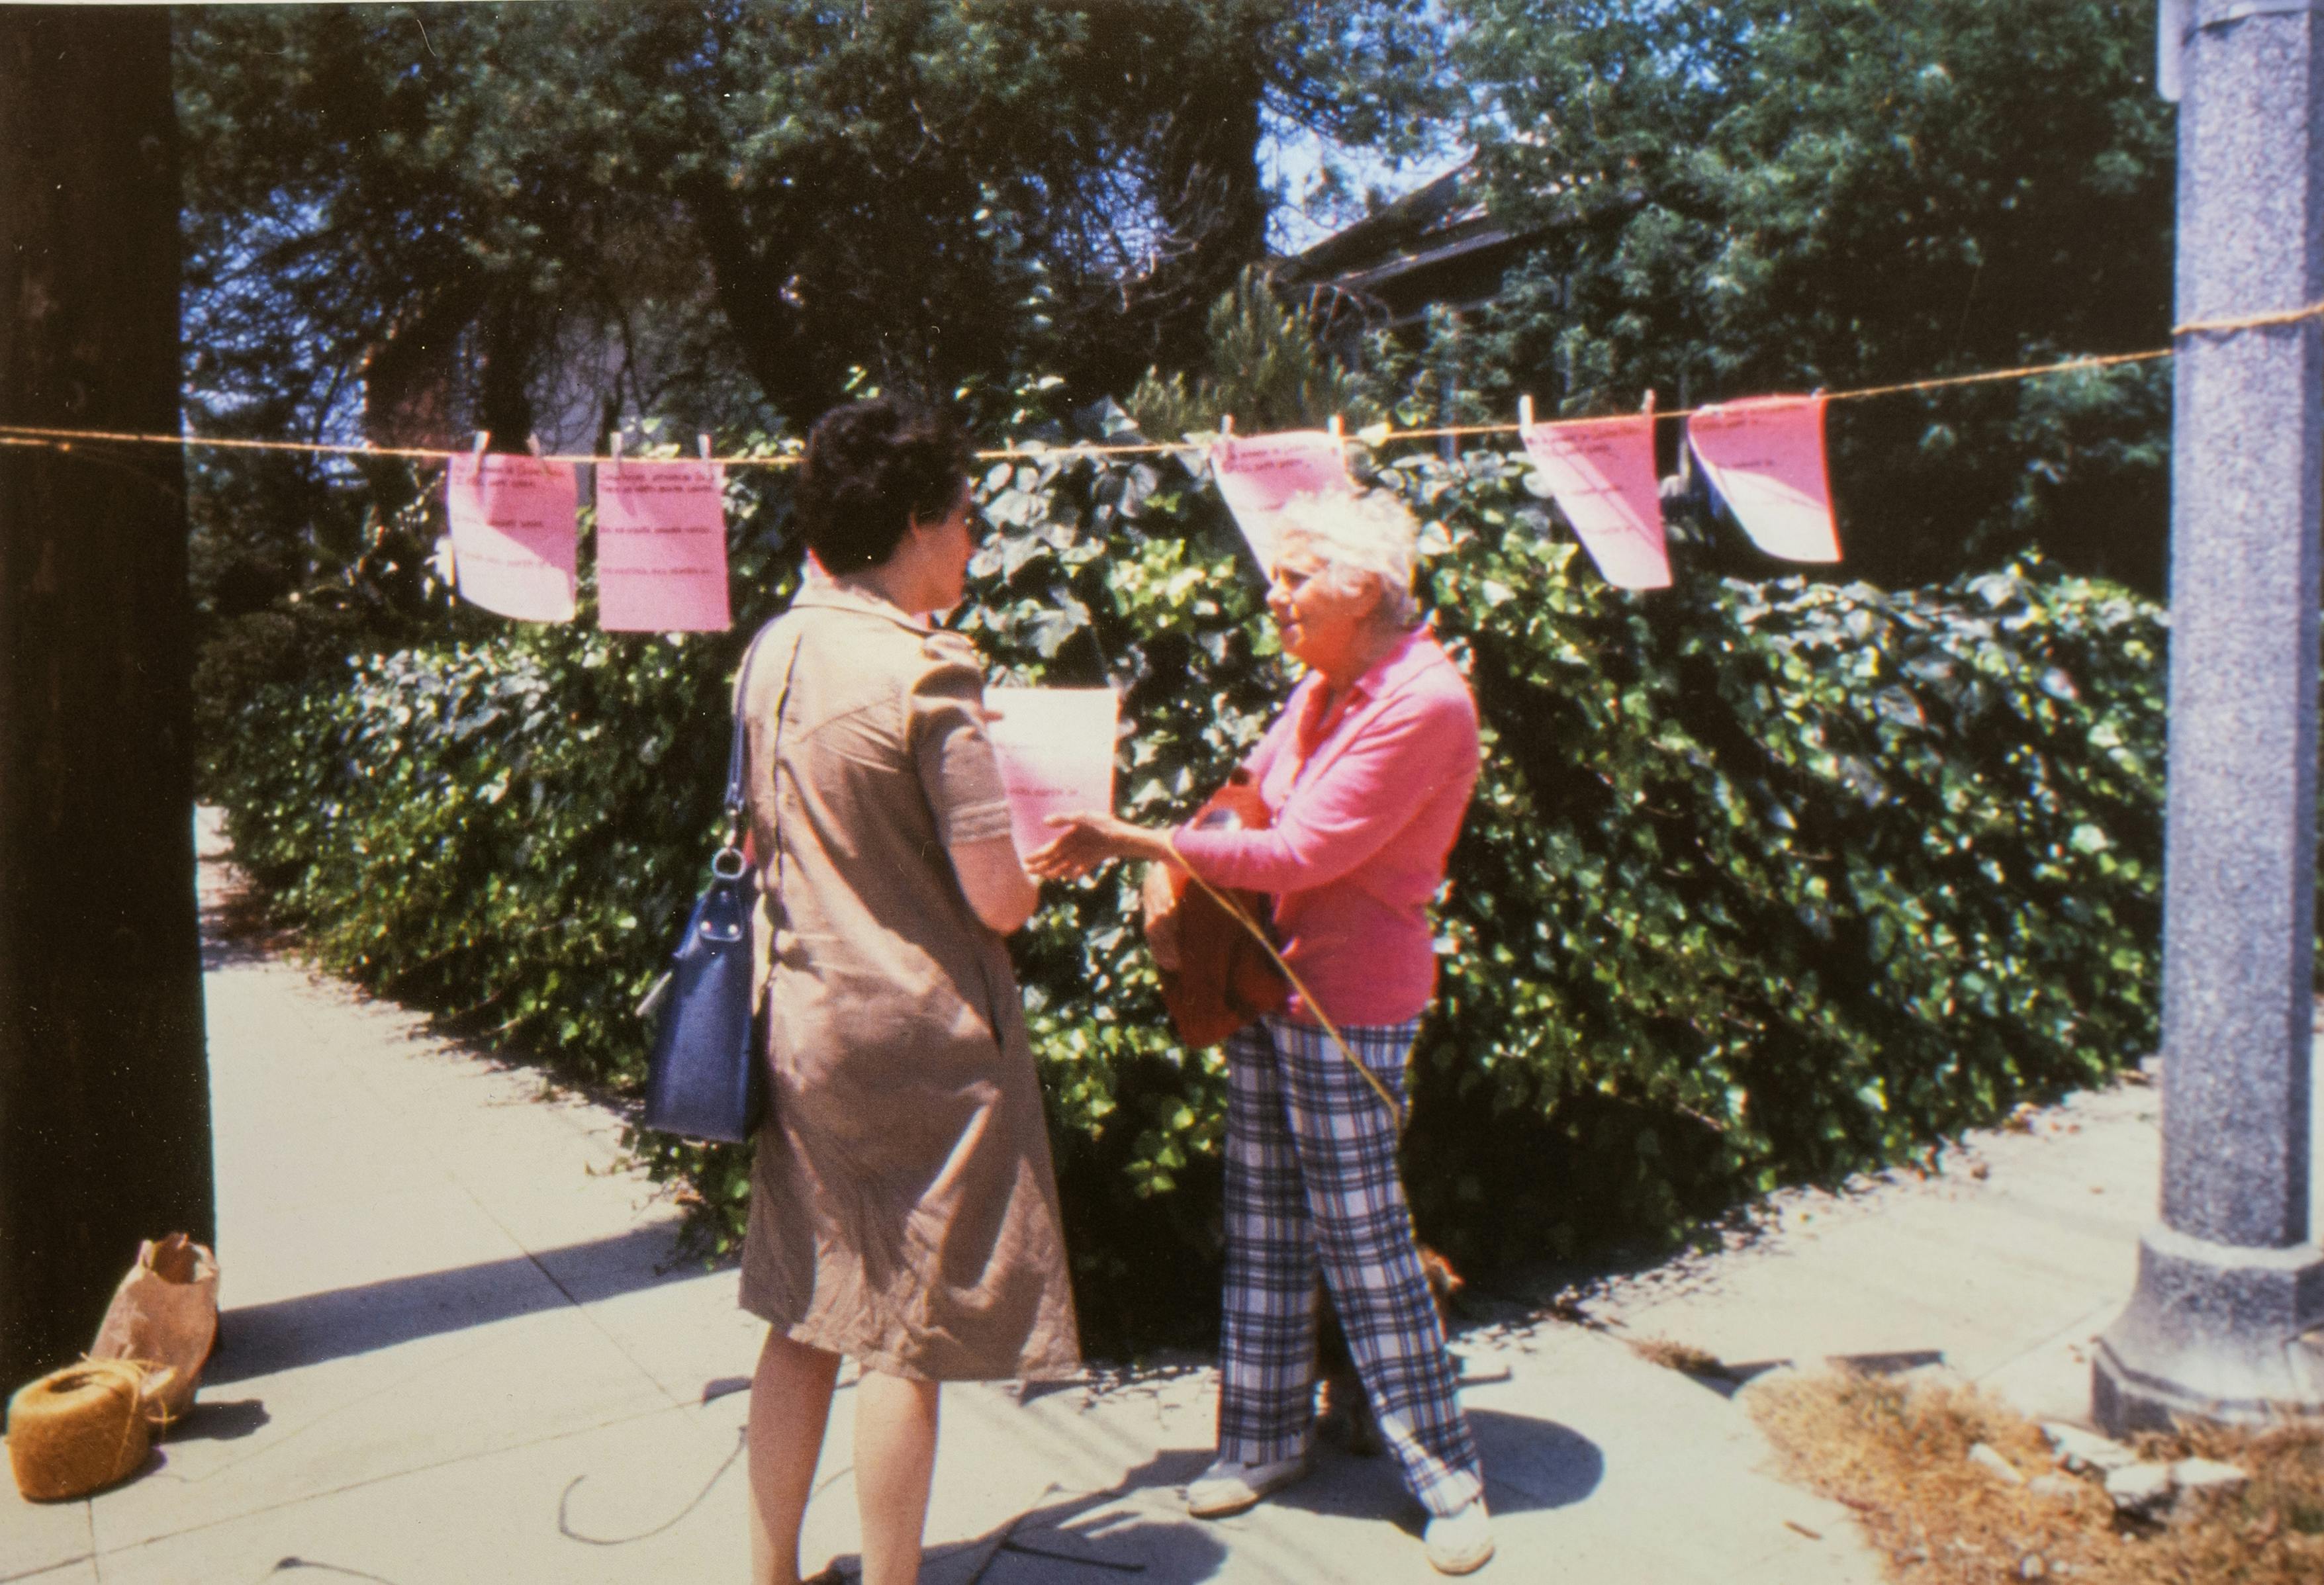 A color photograph, at the center of which two women are speaking. One woman, who has her back to the camera, hands the other a pink flyer, with words that are not legible in the photograph. They stand between a telephone pole, on the left, and a streetlamp, on the right, from which a clothesline has been hung. Clipped to the clothesline are more pink sheets of paper with text.